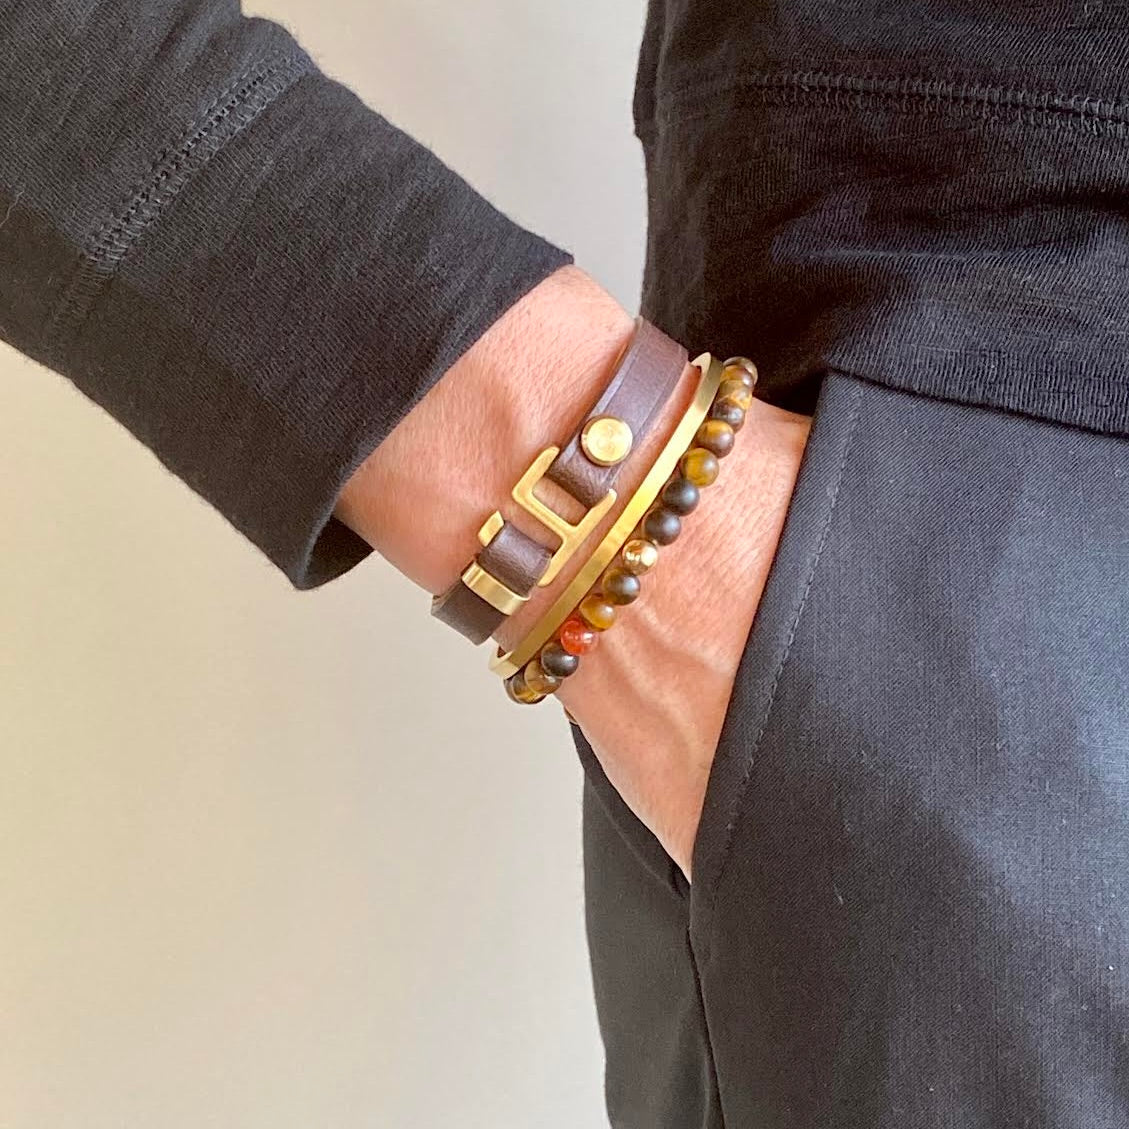 With a trendy, cool modern vibe, this dark brown/tan Italian leather cuff bracelet is paired with your choice of brushed stainless steel or black ceramic hardware. Our signature cuff bracelet is a modern staple for your WristBend collection. Made by WristBend